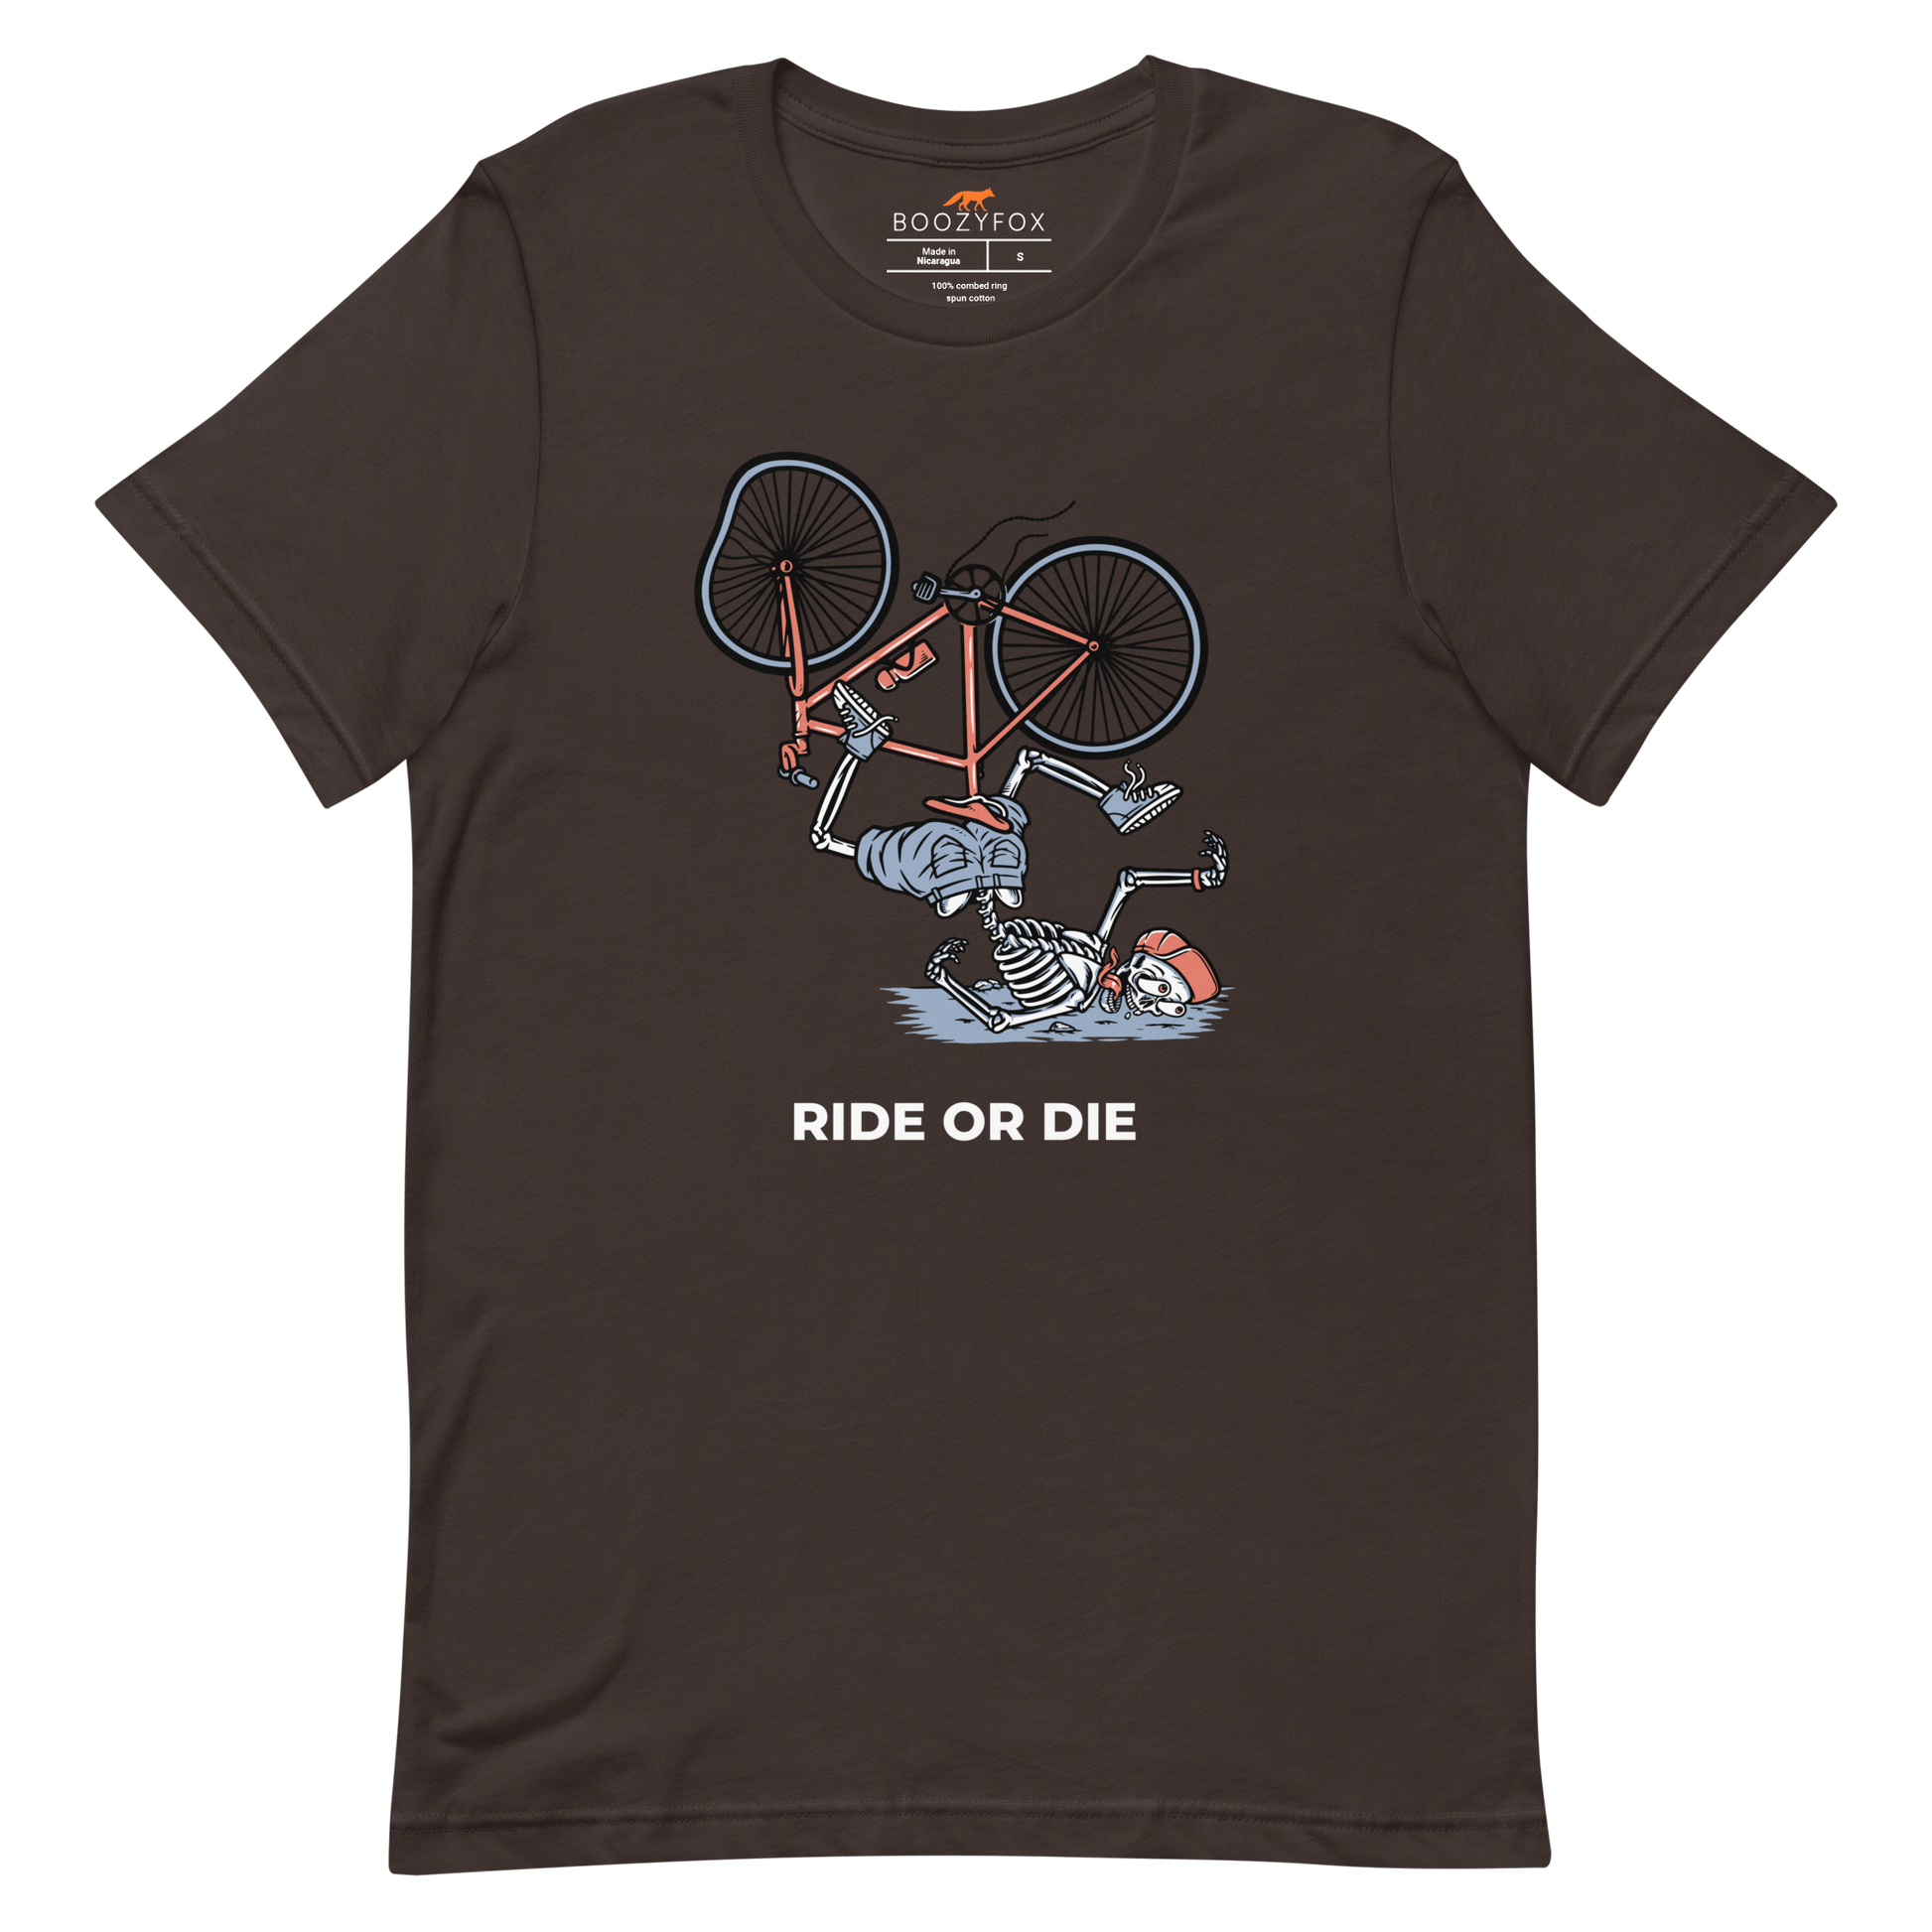 Brown Premium Ride or Die Tee featuring a bold Skeleton Falling While Riding a Bicycle graphic on the chest - Funny Graphic Skeleton Tees - Boozy Fox